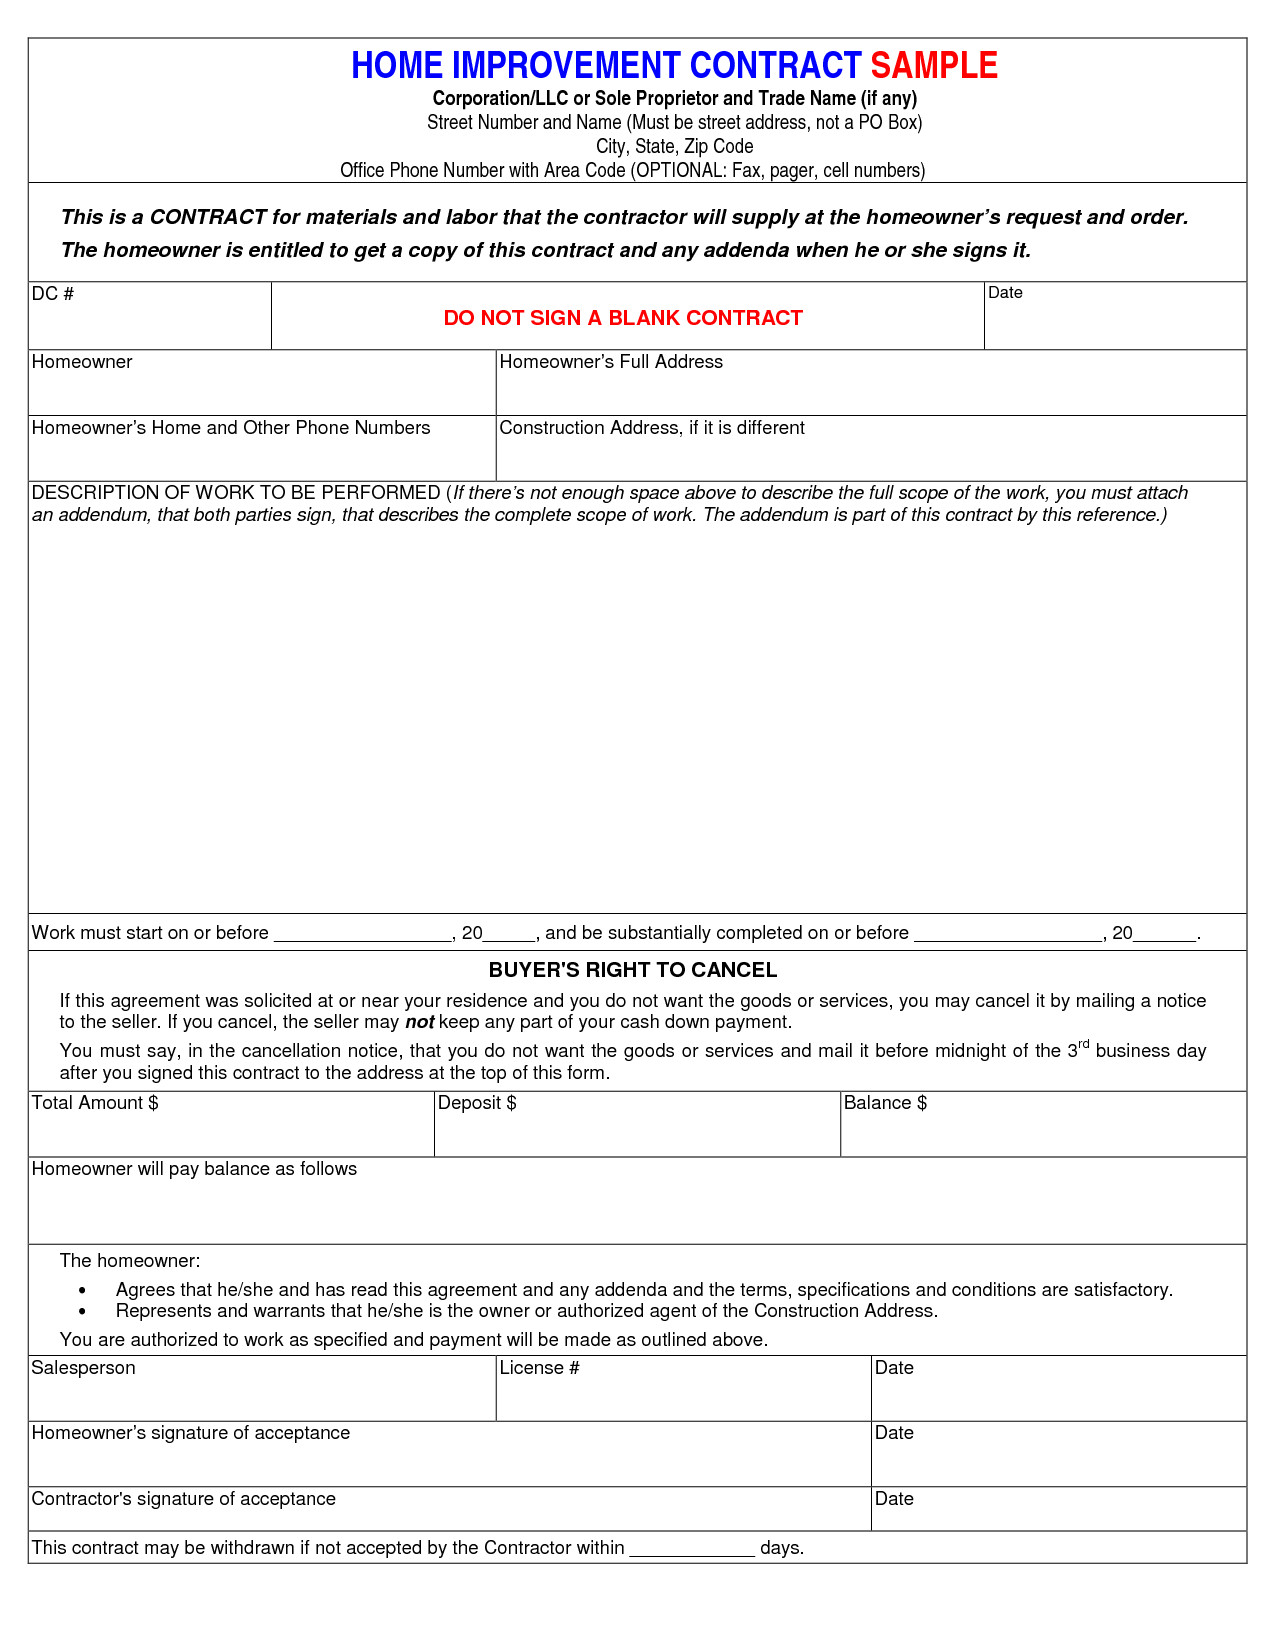 Home Improvement Contract Template Home Improvement Contract Free Printable Documents